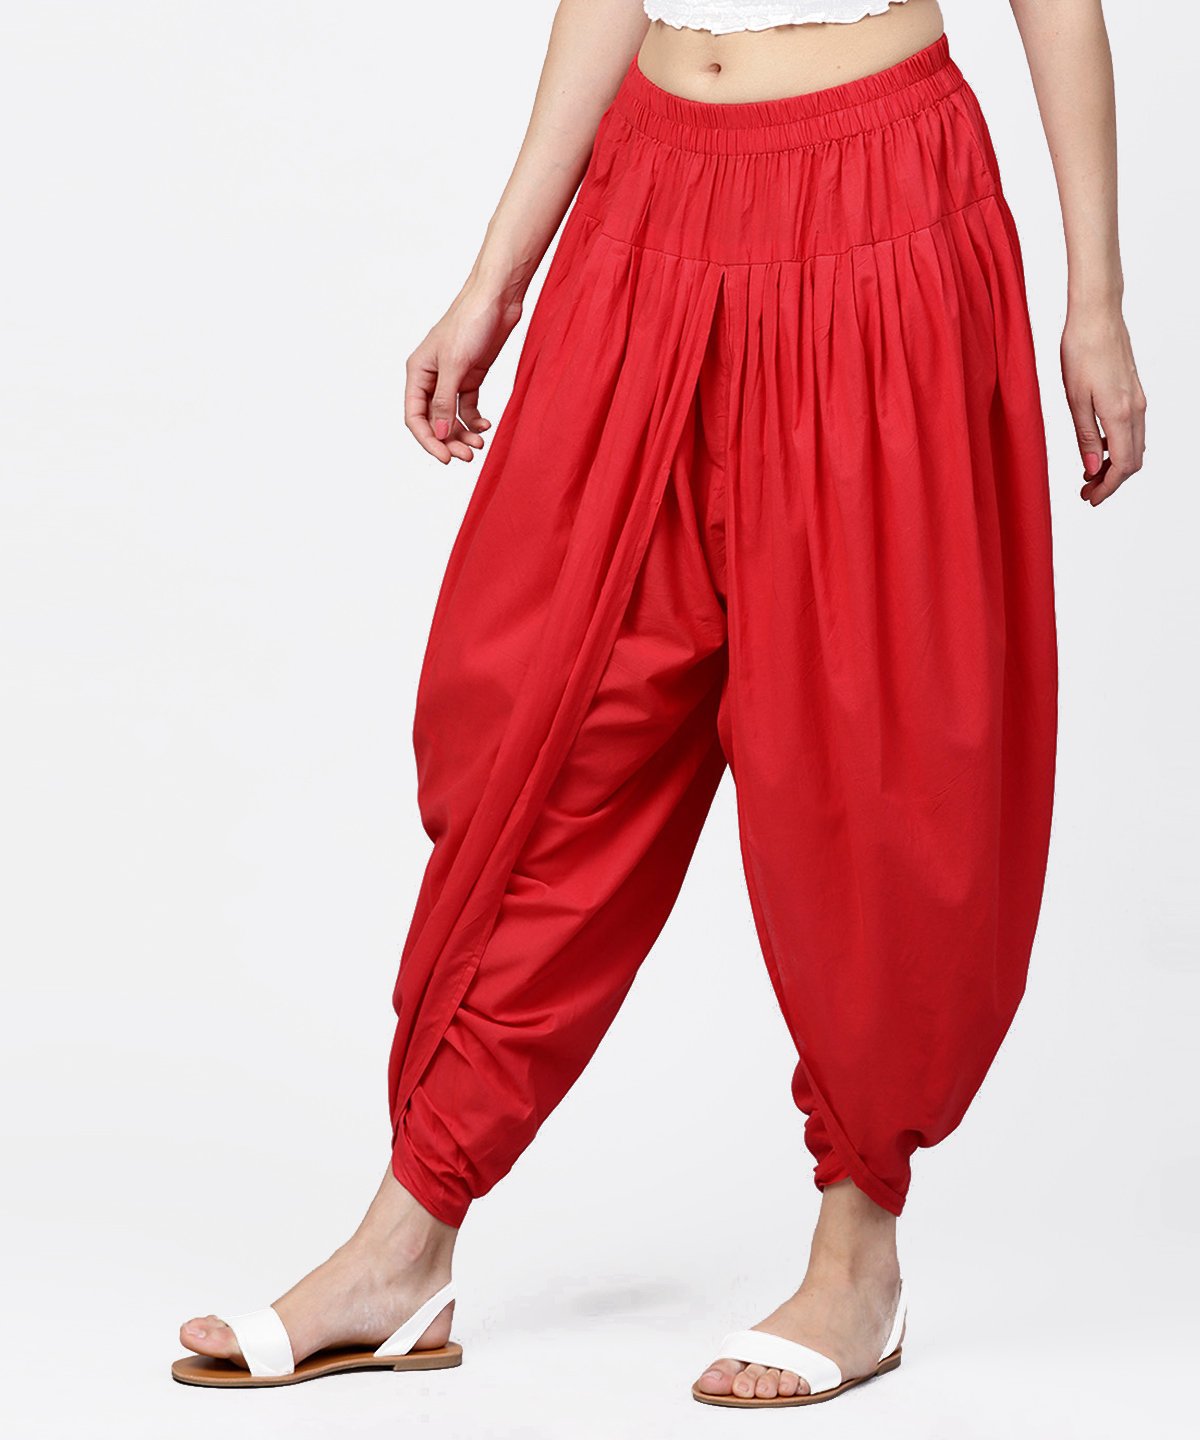 Women's Solid Crimson Red Ankle Length Cotton Dhoti Pant - Nayo Clothing